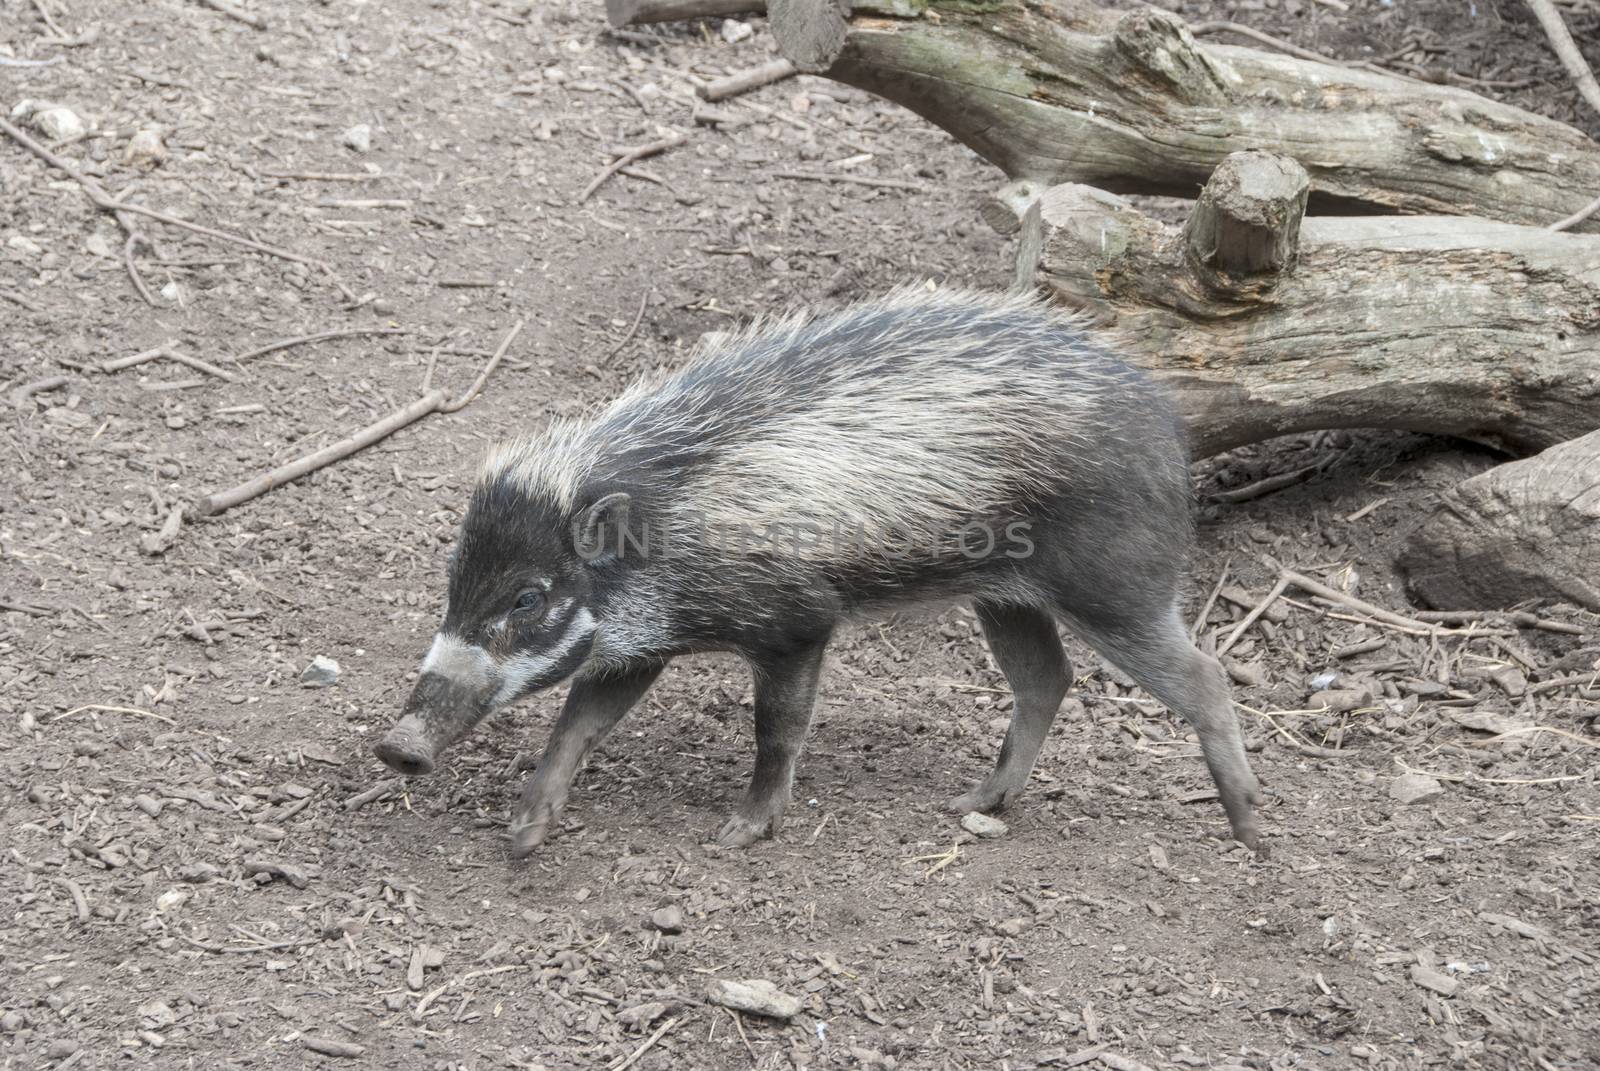 A Visayan Warty Pig  (Sus cebifrons) a critically endangered species from the Philippines.